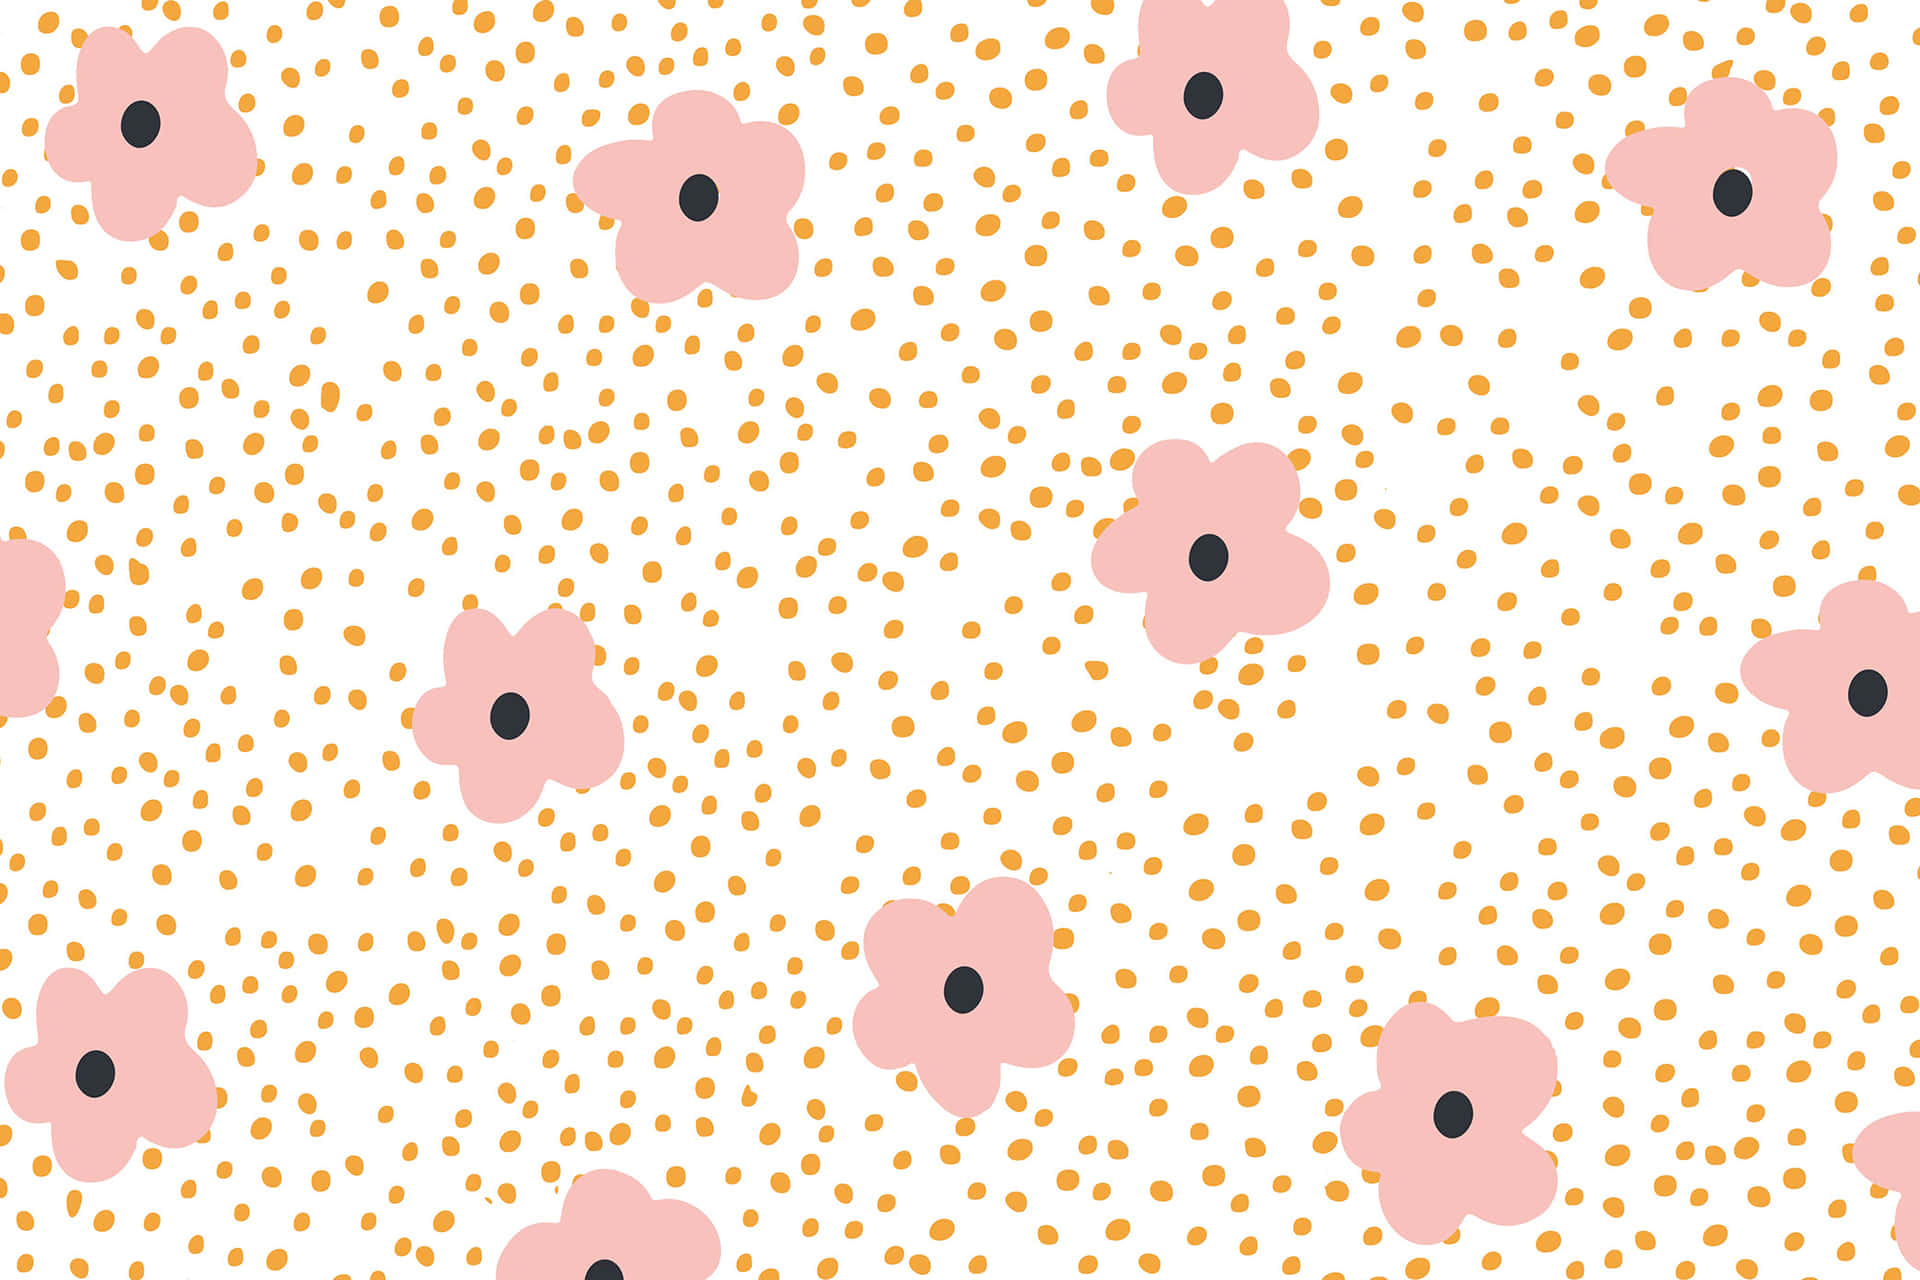 Stand Out With Pink And White Polka Dot Wallpaper